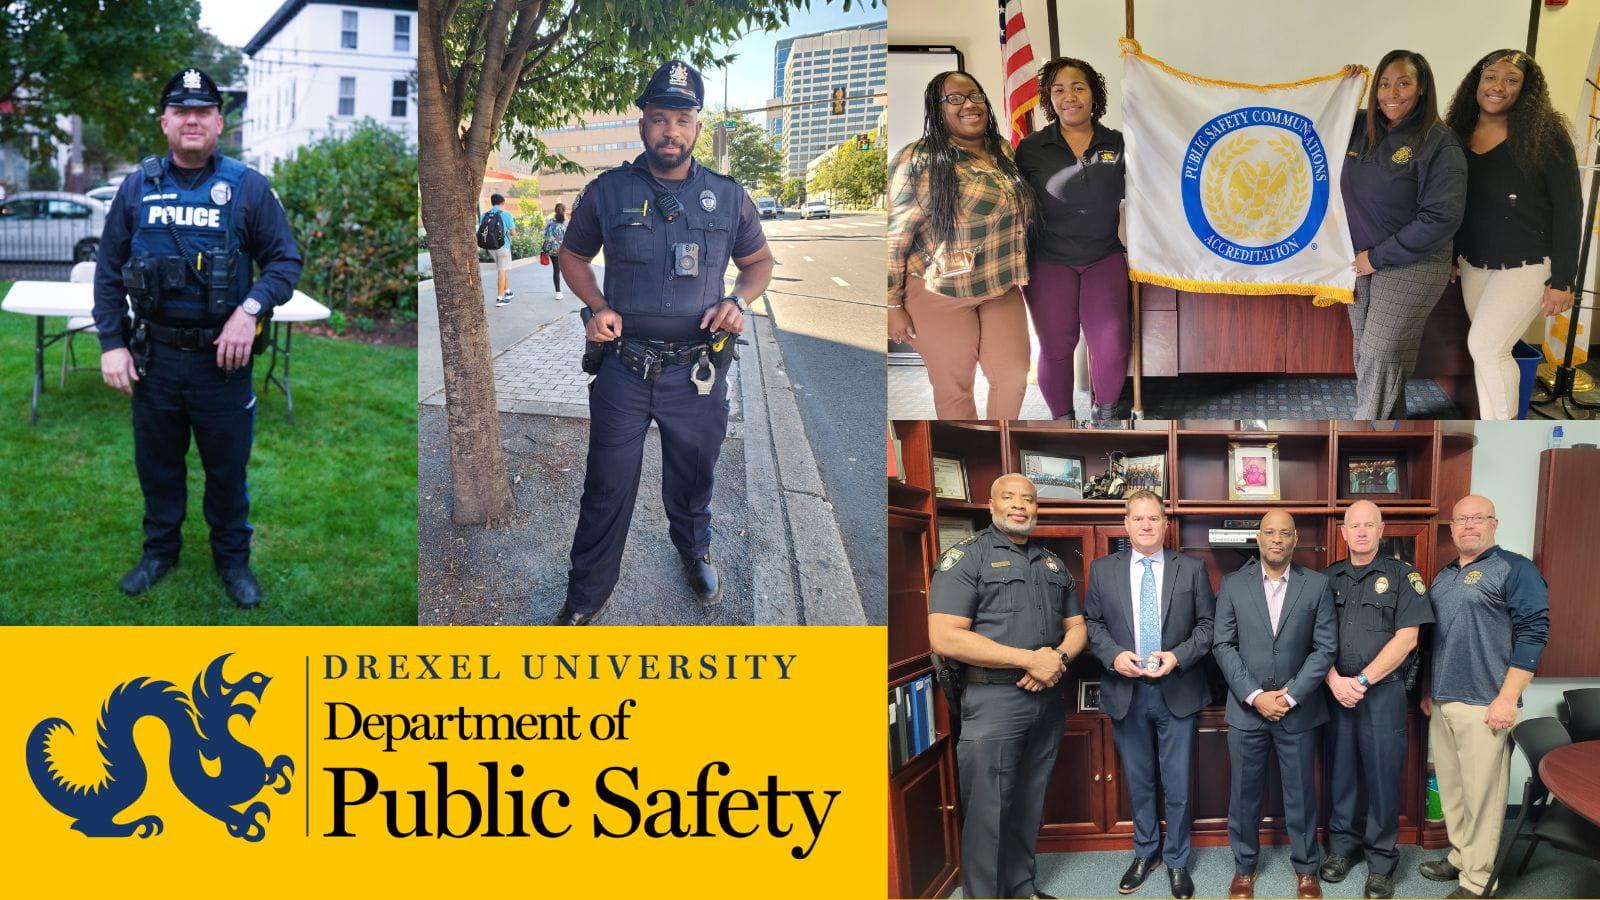 Public Safety employees new to the team since July! (Left: Police Officer Dave Monahan; Center: Police Officer Dean James; Top Right: Dispatchers Rahnasja Dyson and Samantha Howard pictured with Lead Dispatch Supervisor Stephanie Jones and Director of Communications Caneshia Bailey; Bottom Right: Police Officer James Smith and Michael Haywood pictured with Chief Singleton, Captain Hall, and Sgt. Freeman